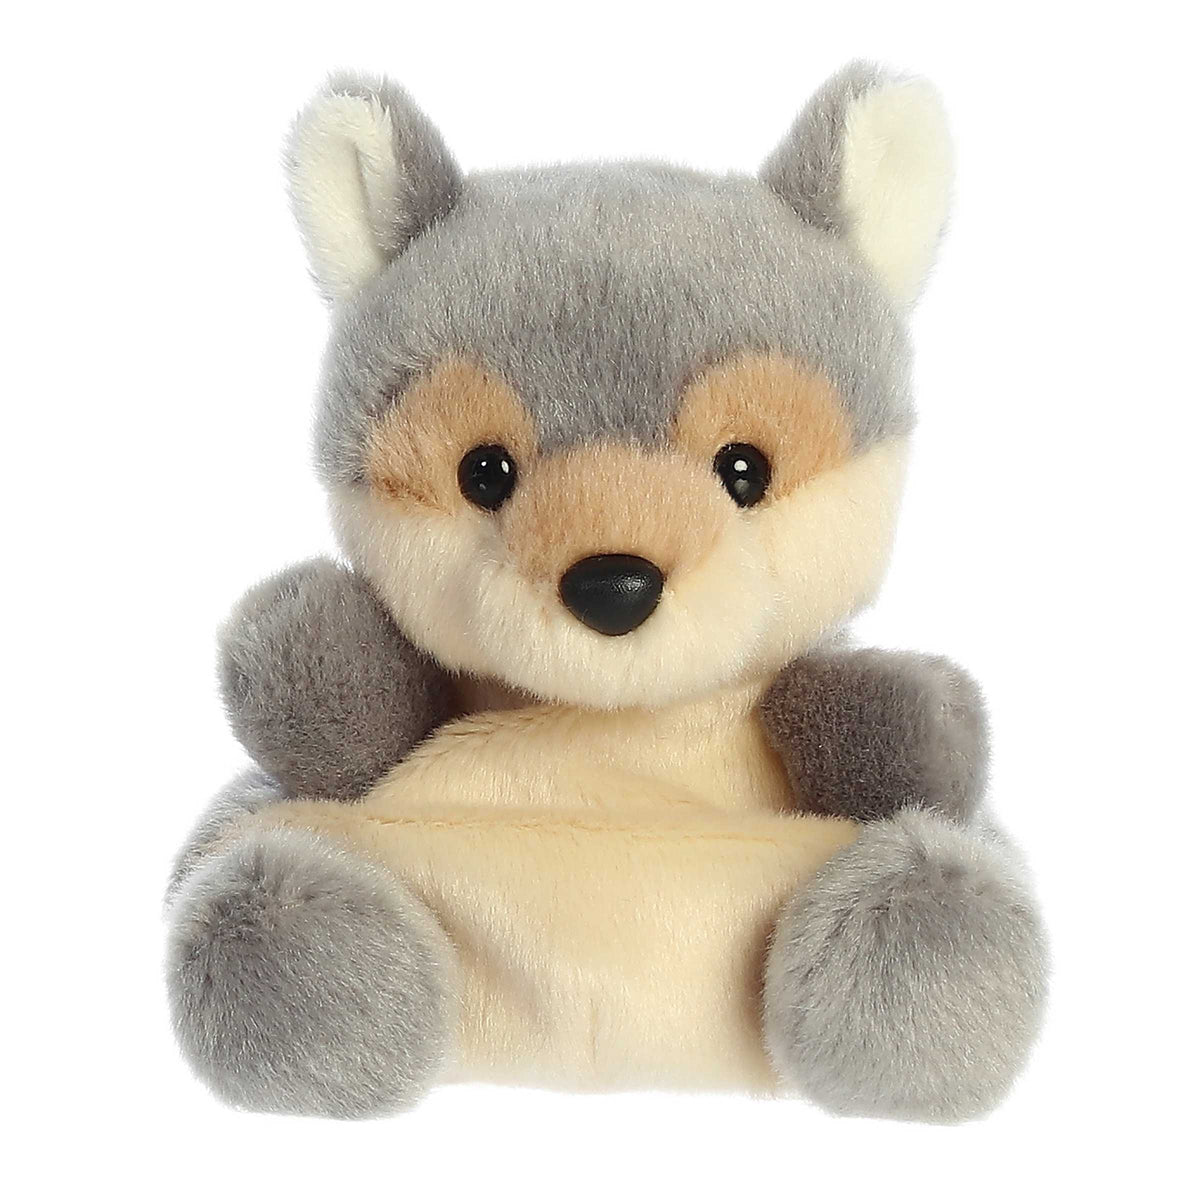 Adorable cute wolf Stuffed animals with mini body and light brown and gray fur, white fur on ears and black eyes and nose.